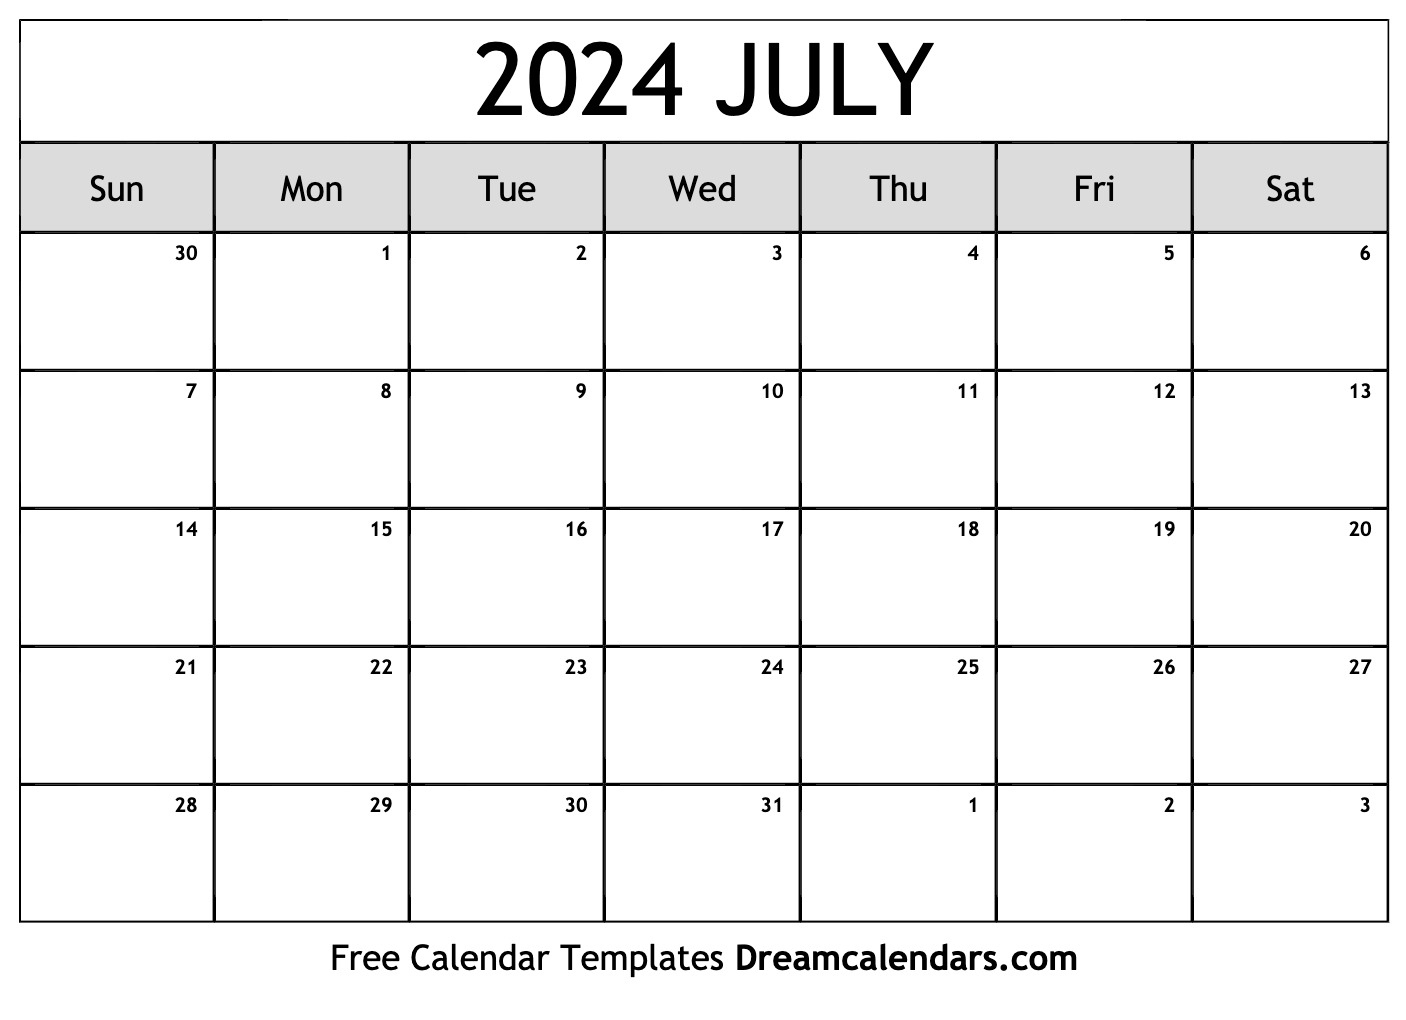 July 2024 Calendar | Free Blank Printable With Holidays | July 2024 Calendar Printable